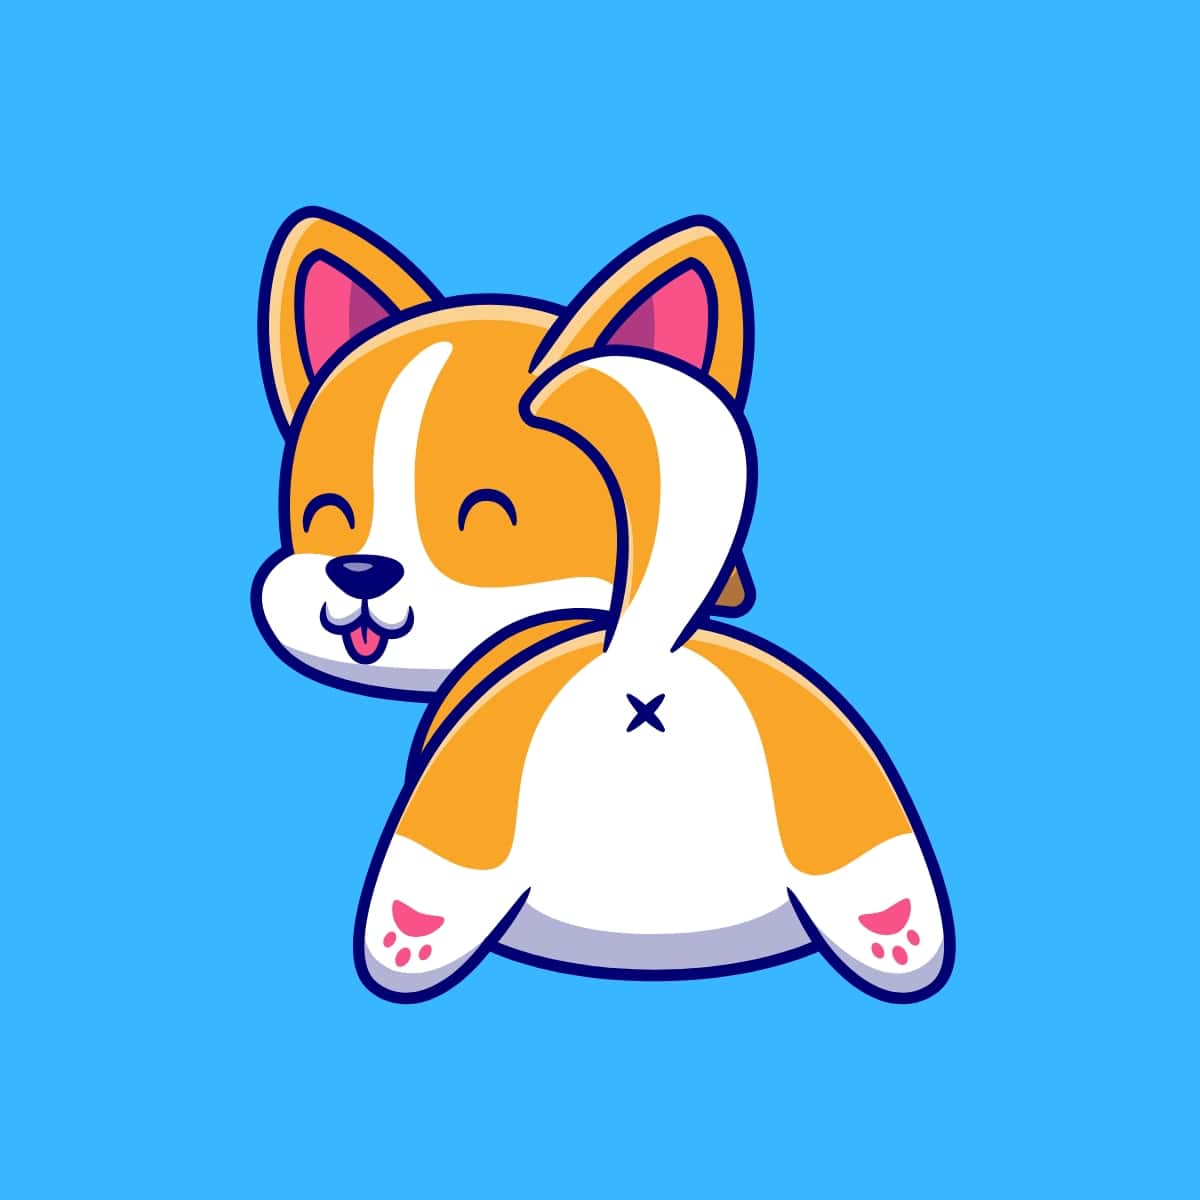 Cartoon graphic of a little dog showing its butt and smiling on a blue background.